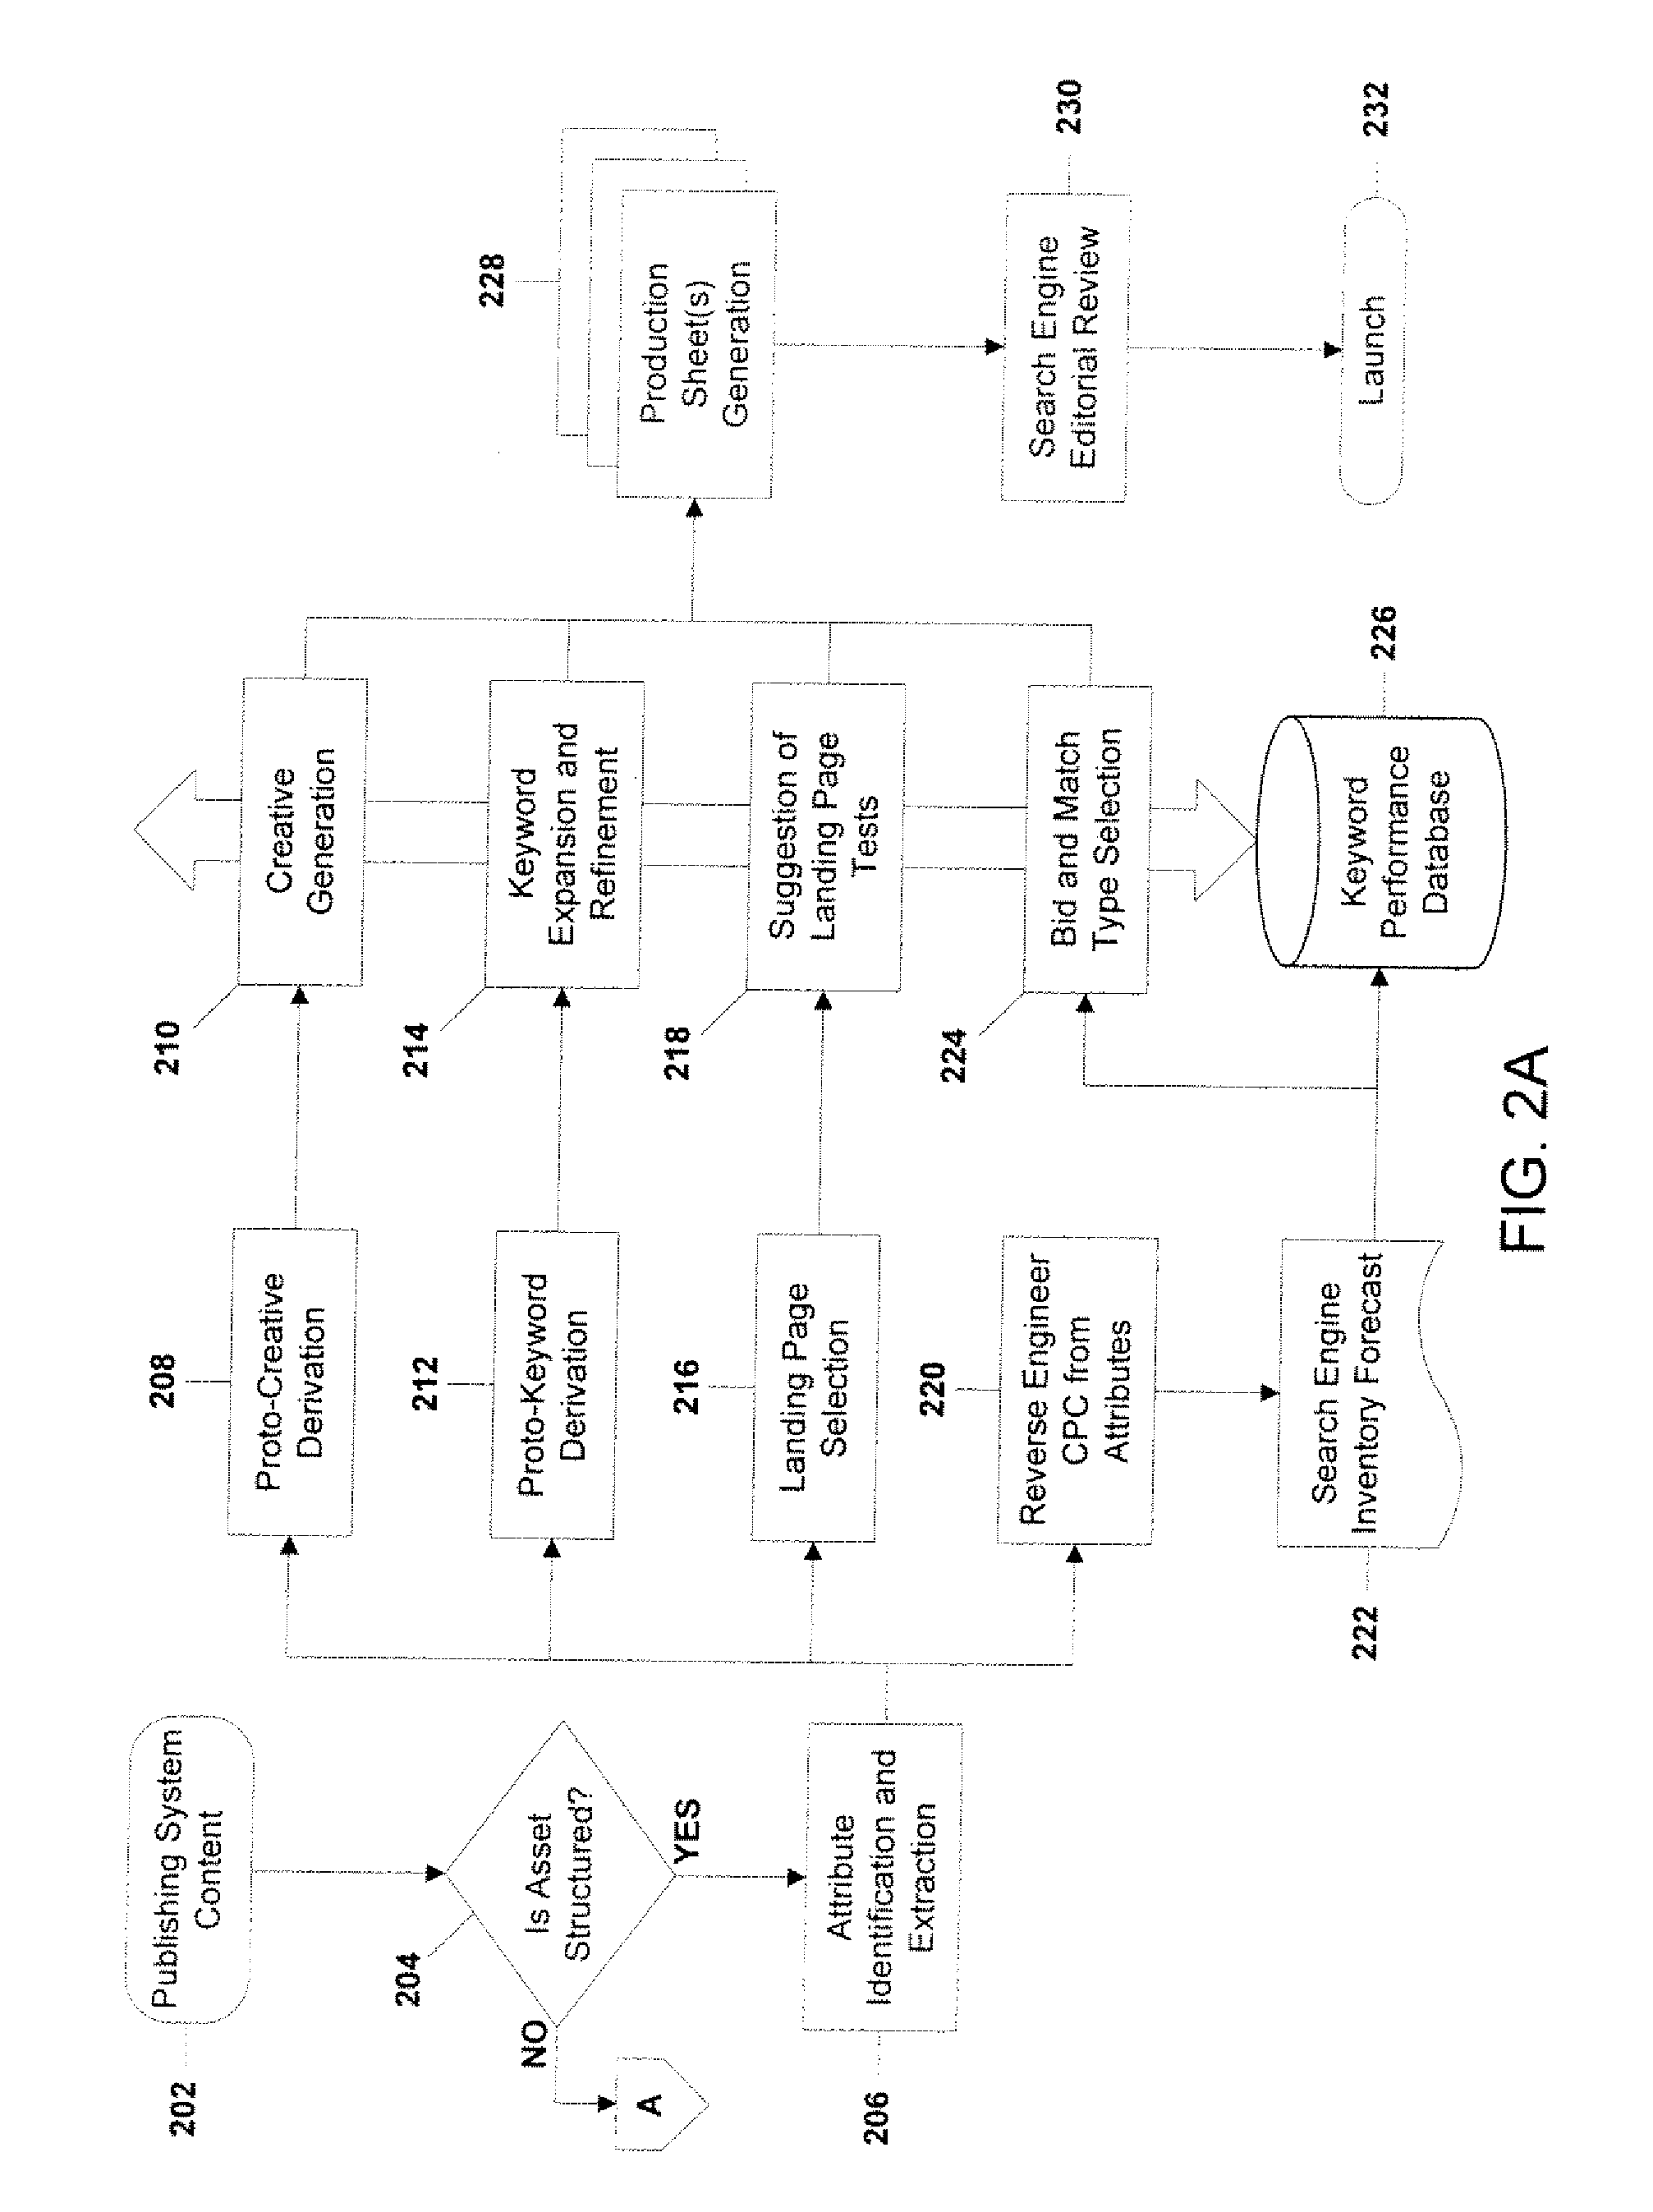 Method and system for developing and managing a computer-based marketing campaign